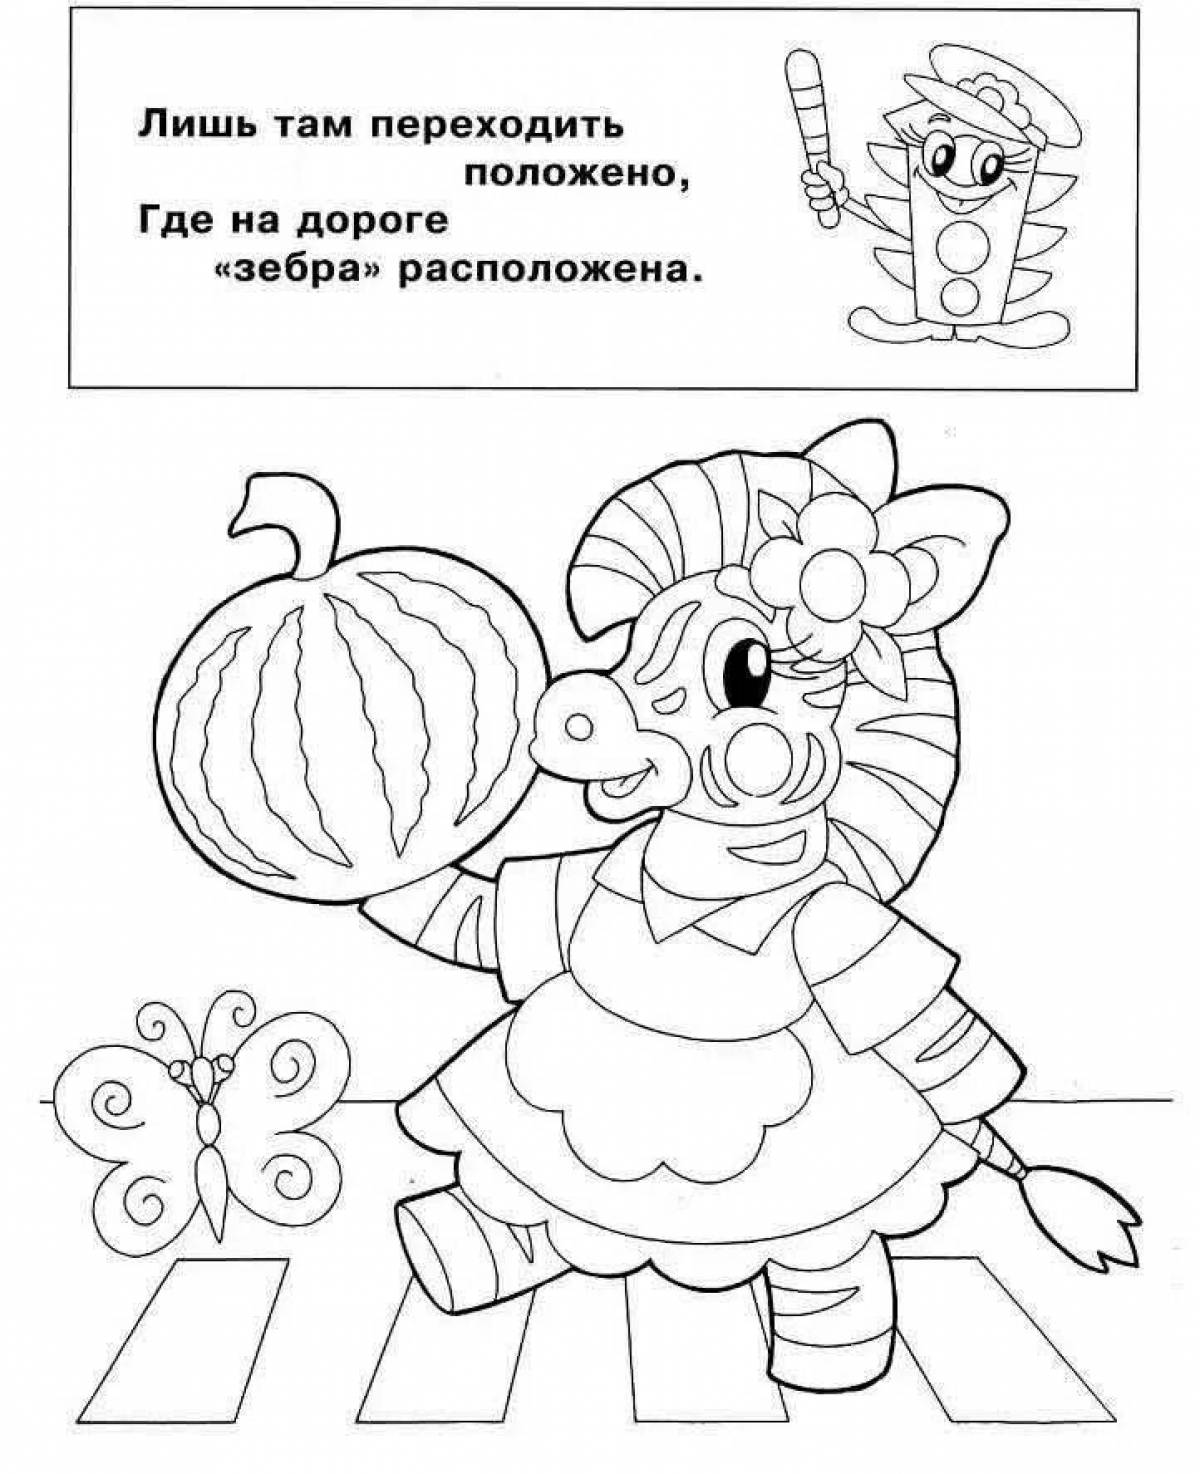 Coloring pages of the rules of the road for children 6-7 years old